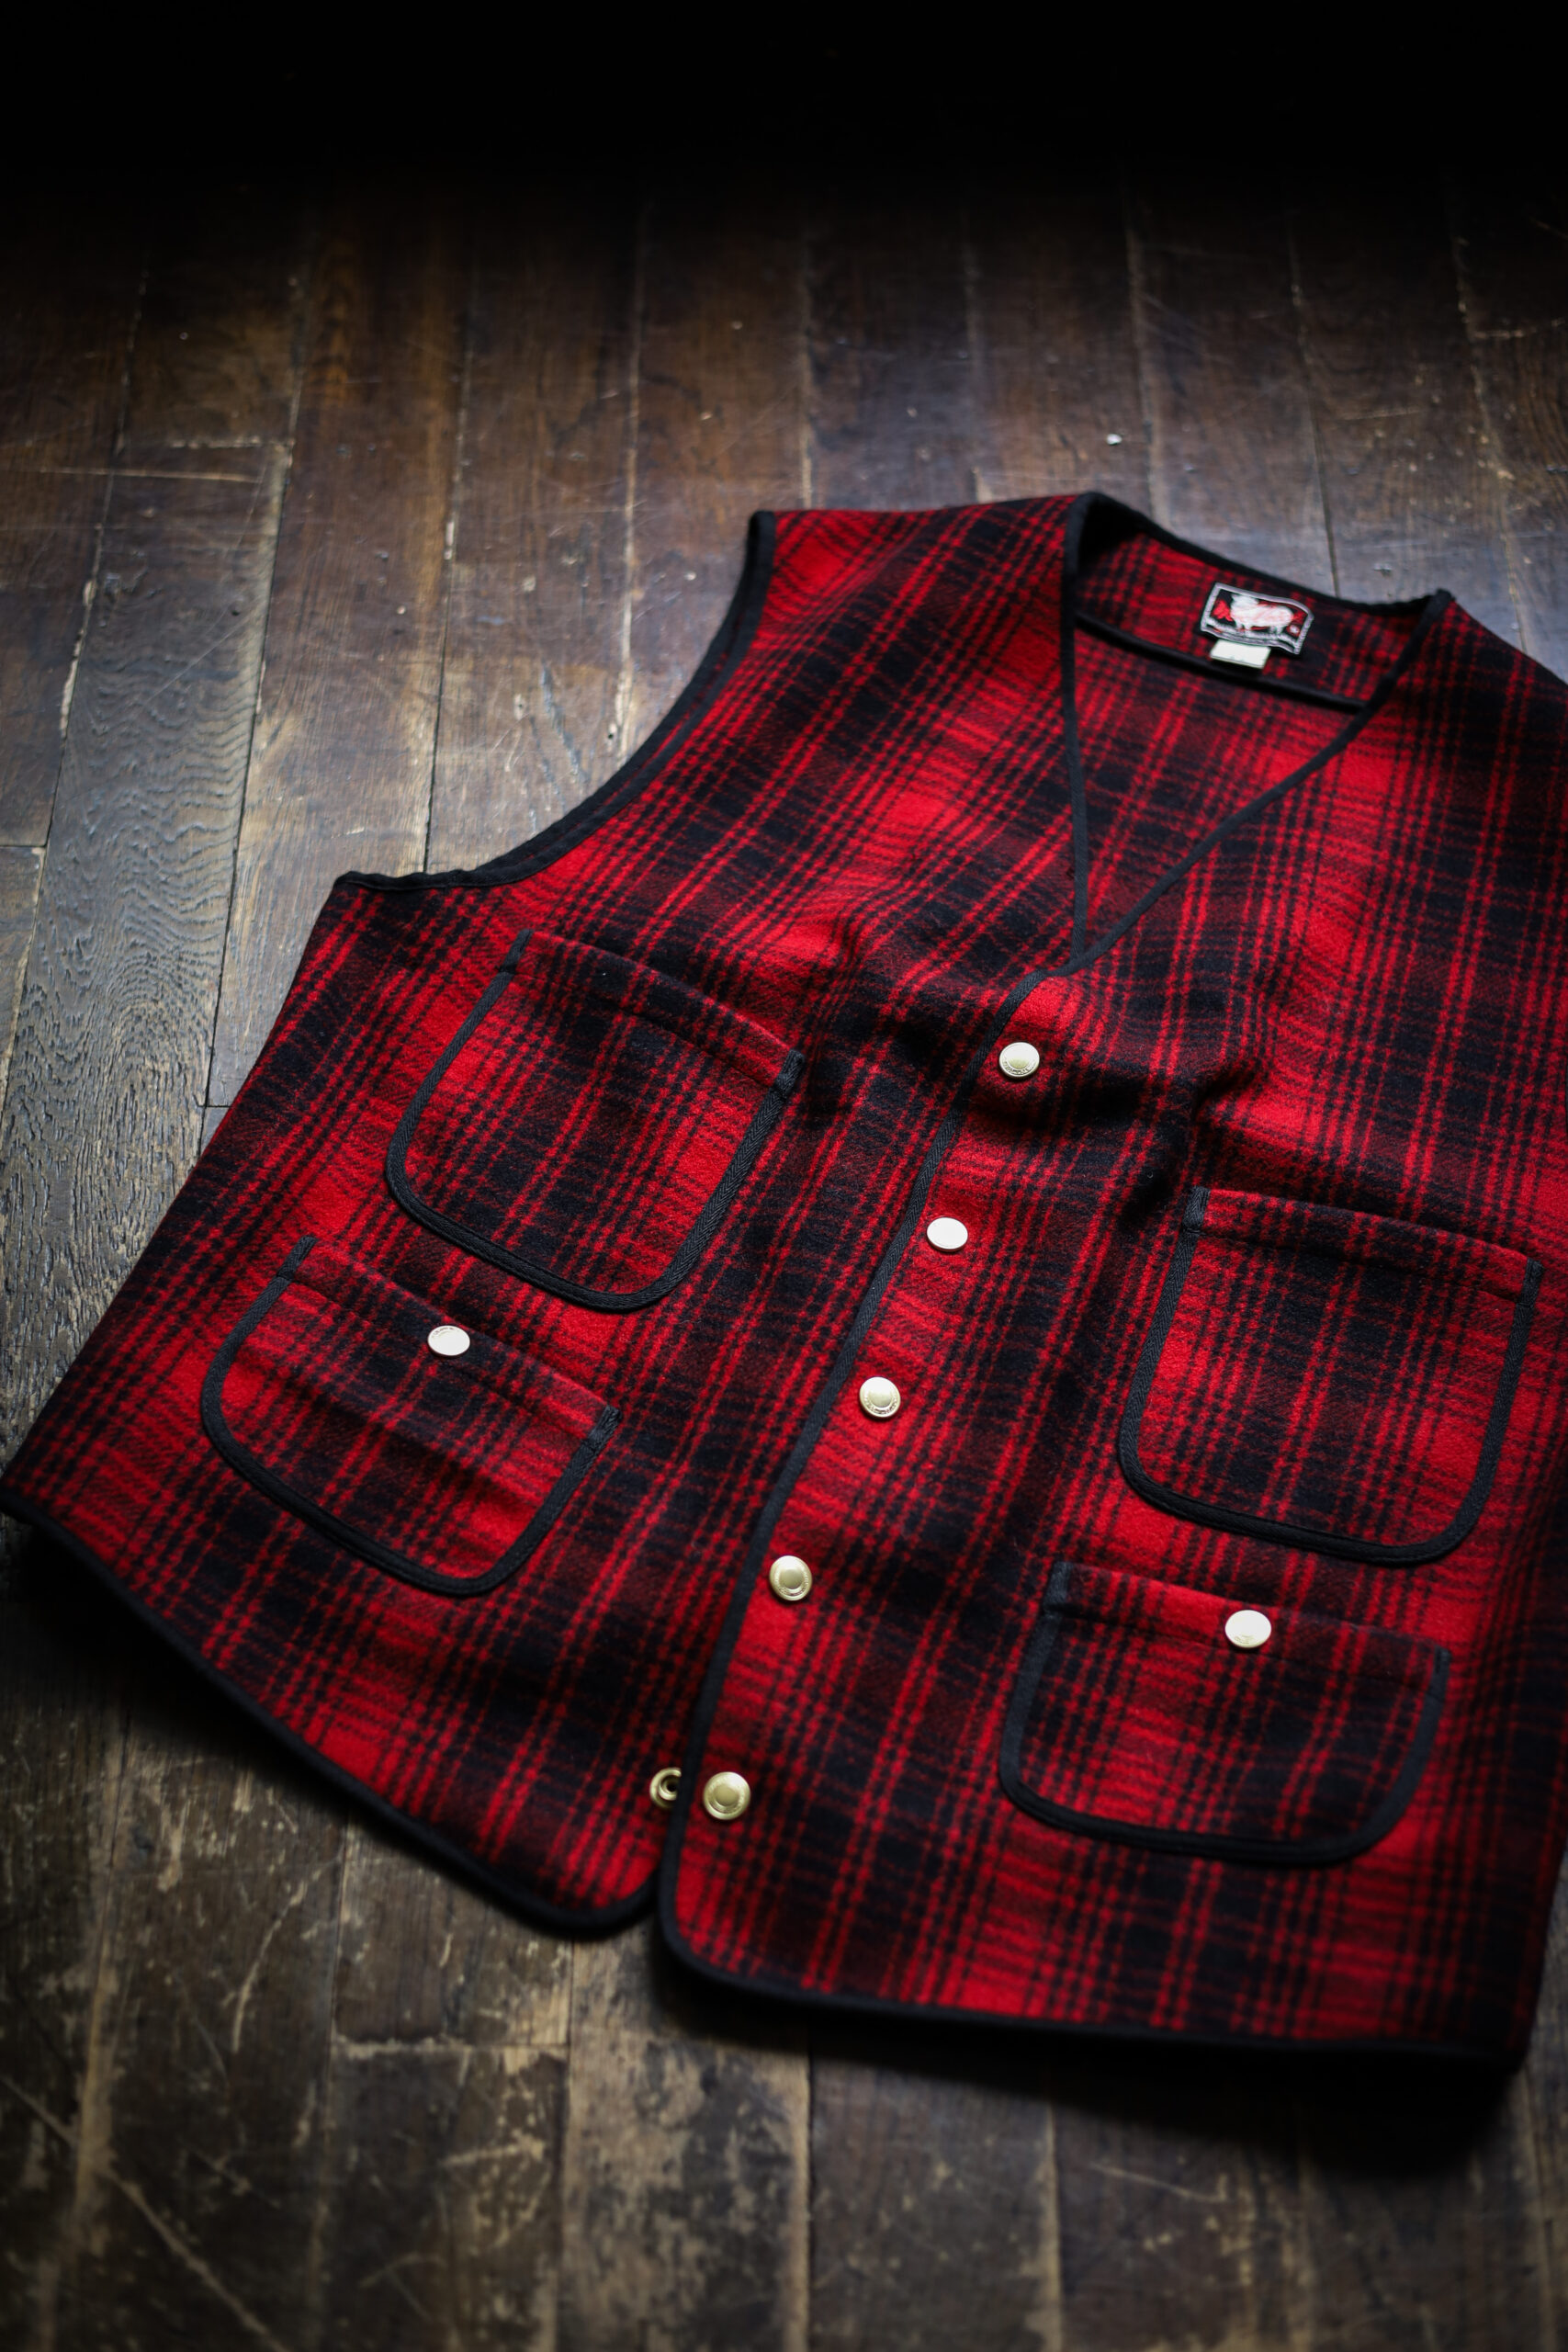 WOOLRICH AUTHENTIC COLLECTION / No.13 VEST | ARCH アーチ - Sapporo